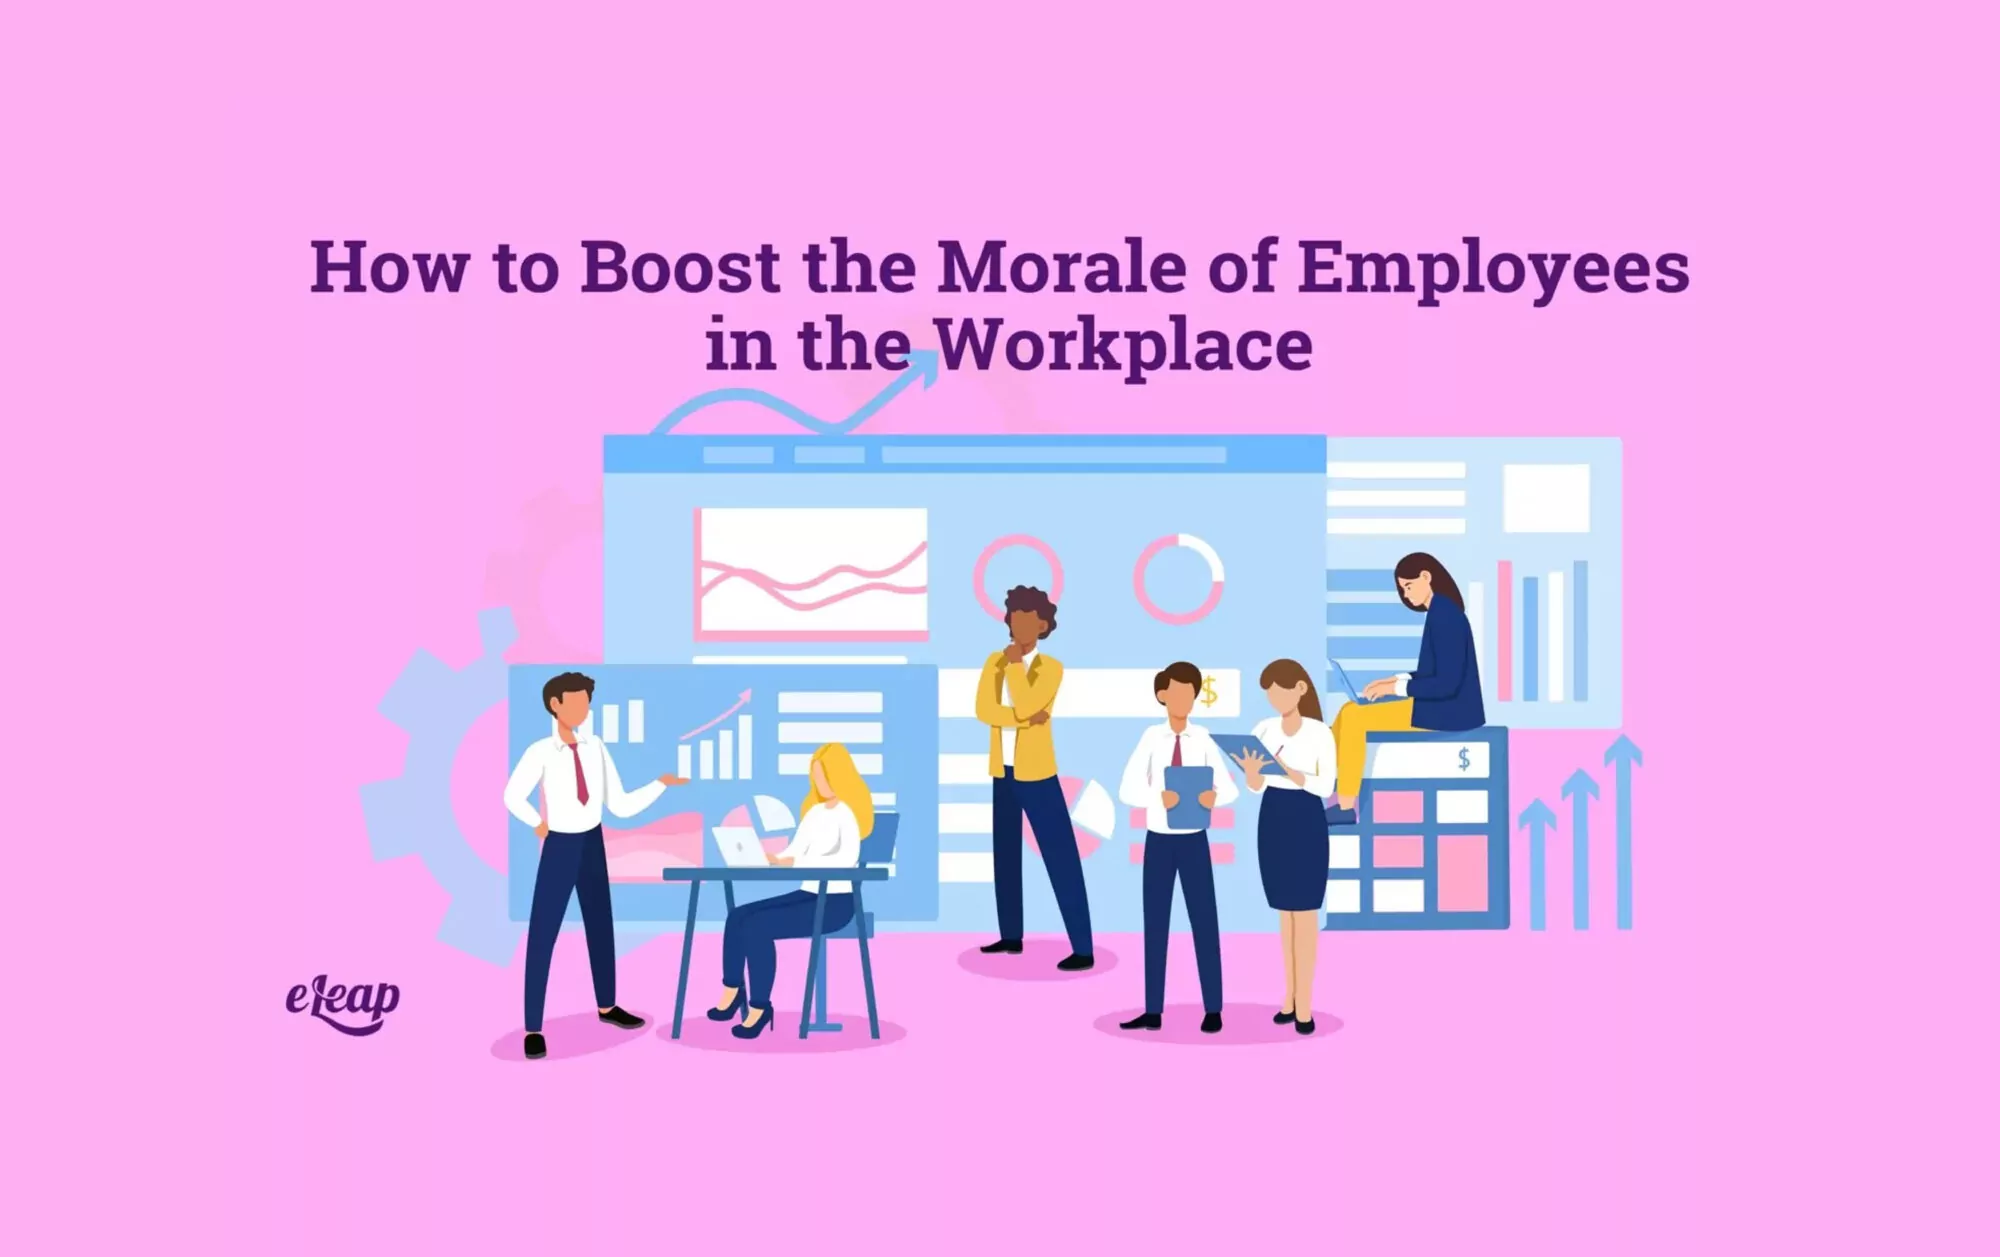 How to Boost the Morale of Employees in the Workplace